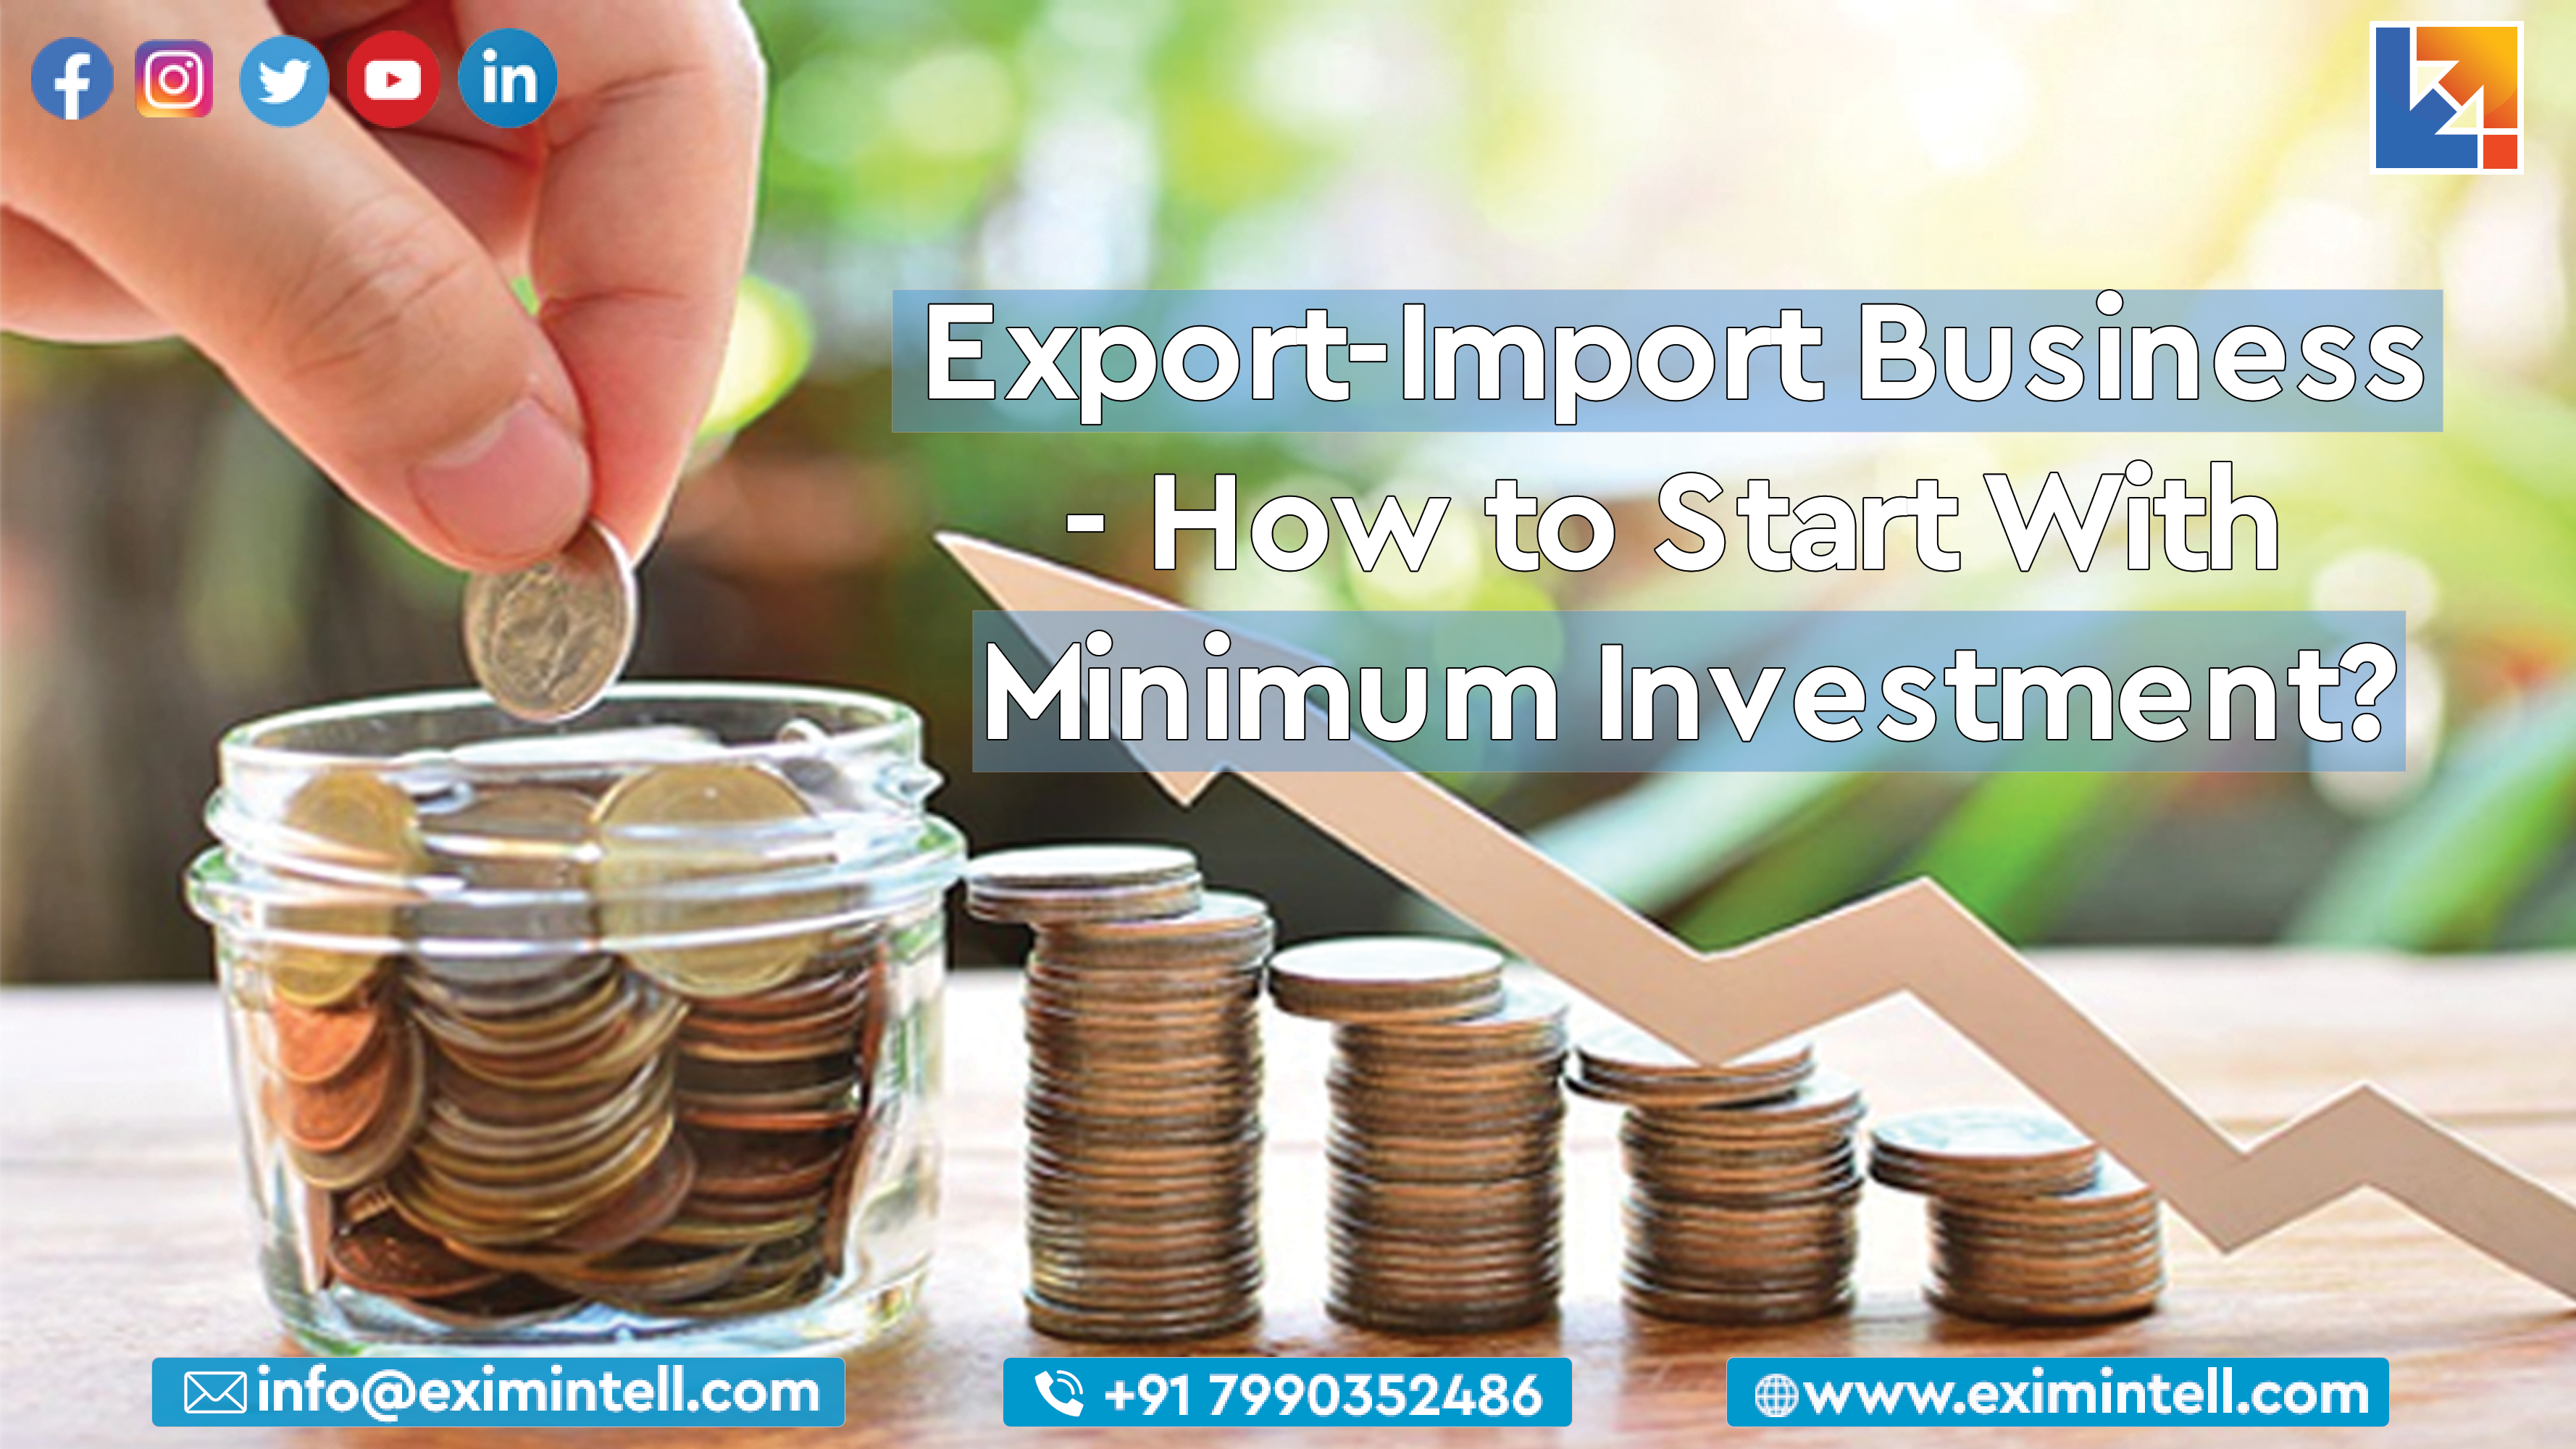 Export-Import Business- How to Start With Minimum Investment?